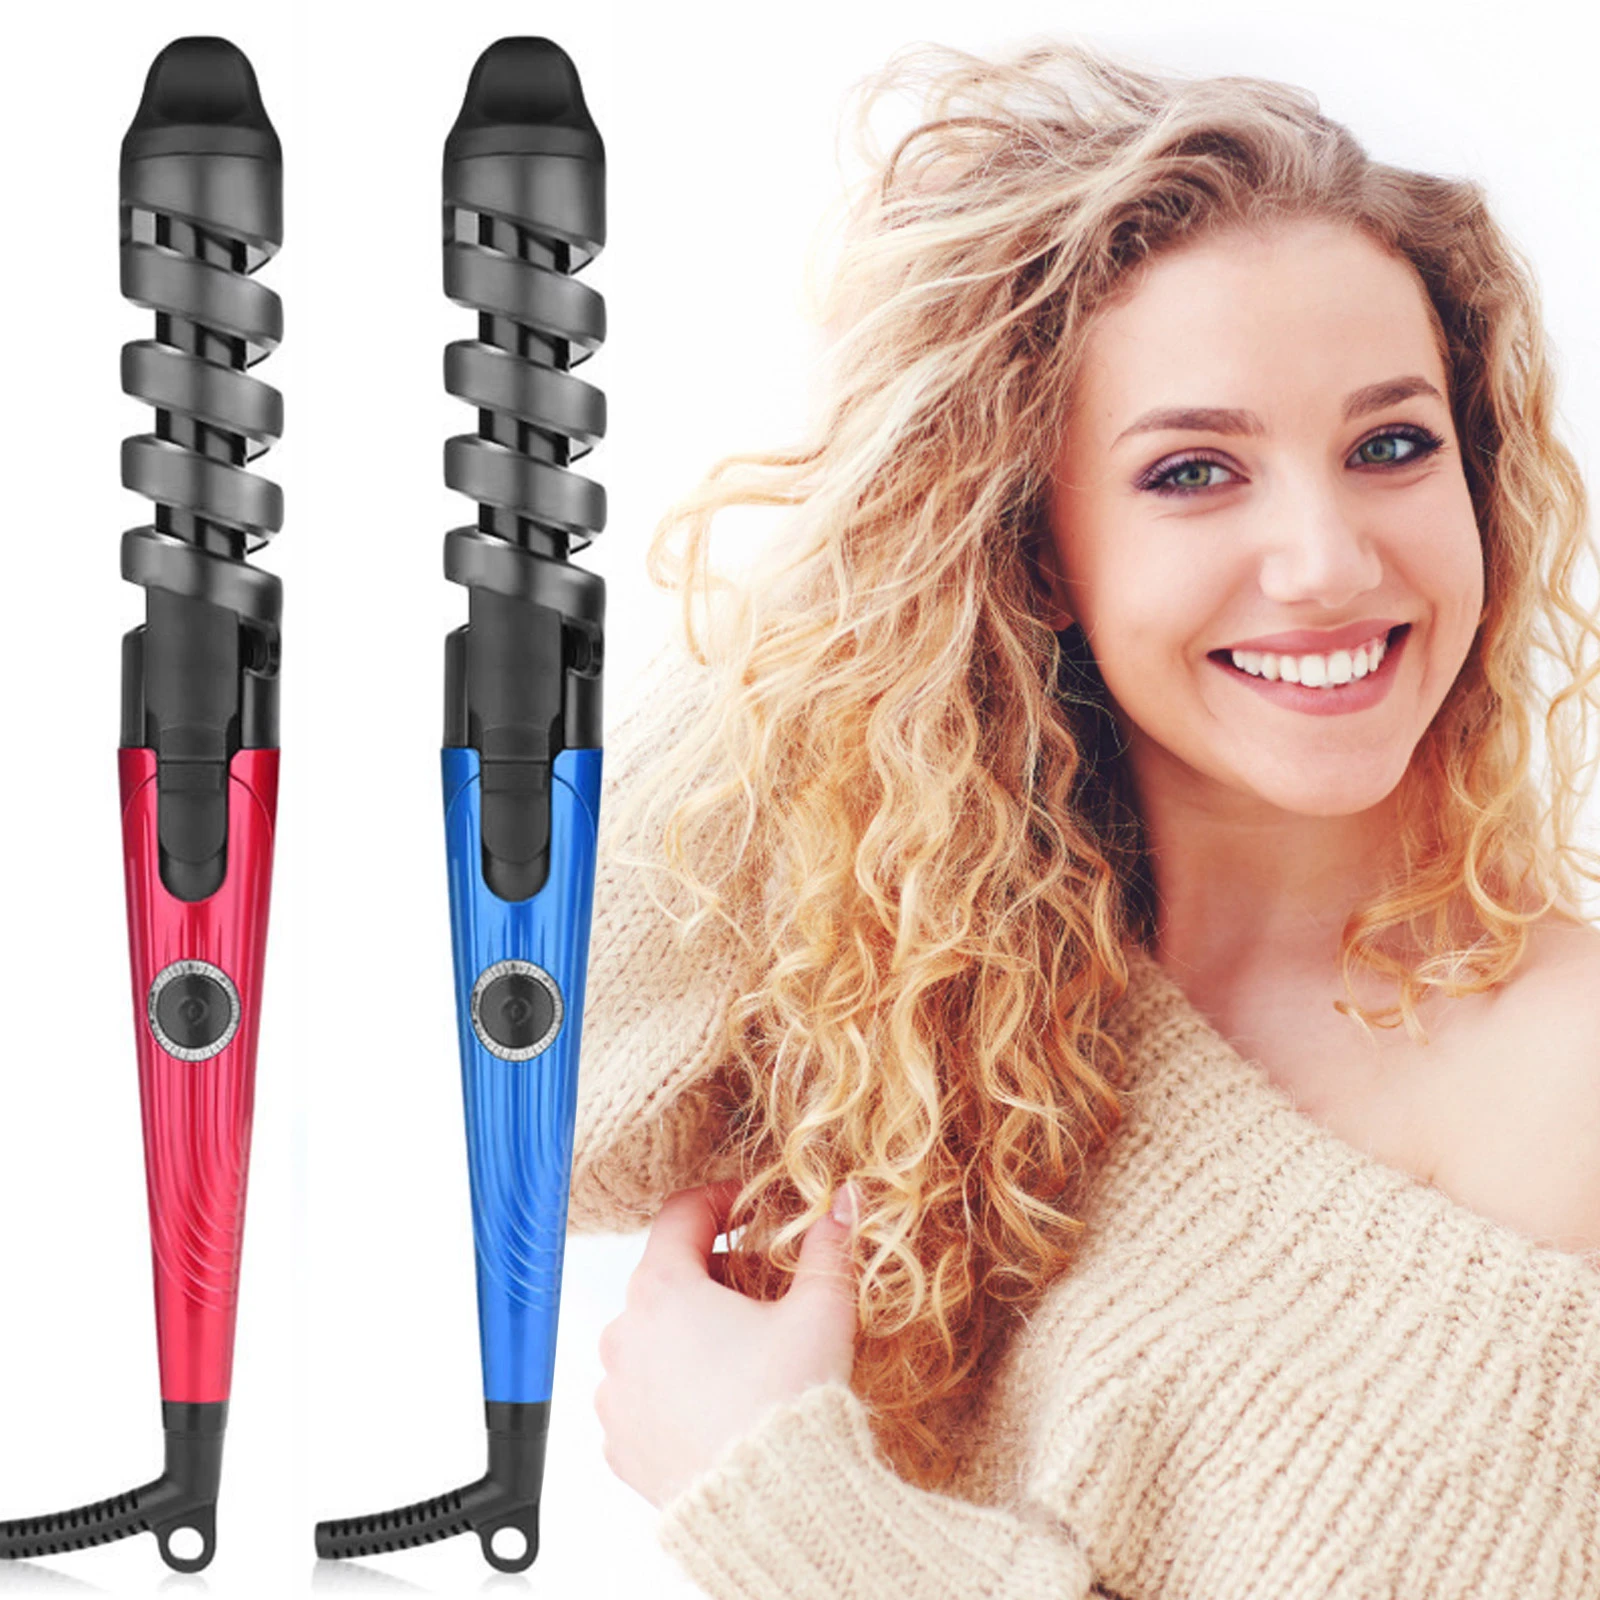 Portable Electric Hair Curler Negative Ions Fast Heating Spiral Hair  Curling Wand Roller Hair Styling Tool Eu Plug - Hair Curler - AliExpress